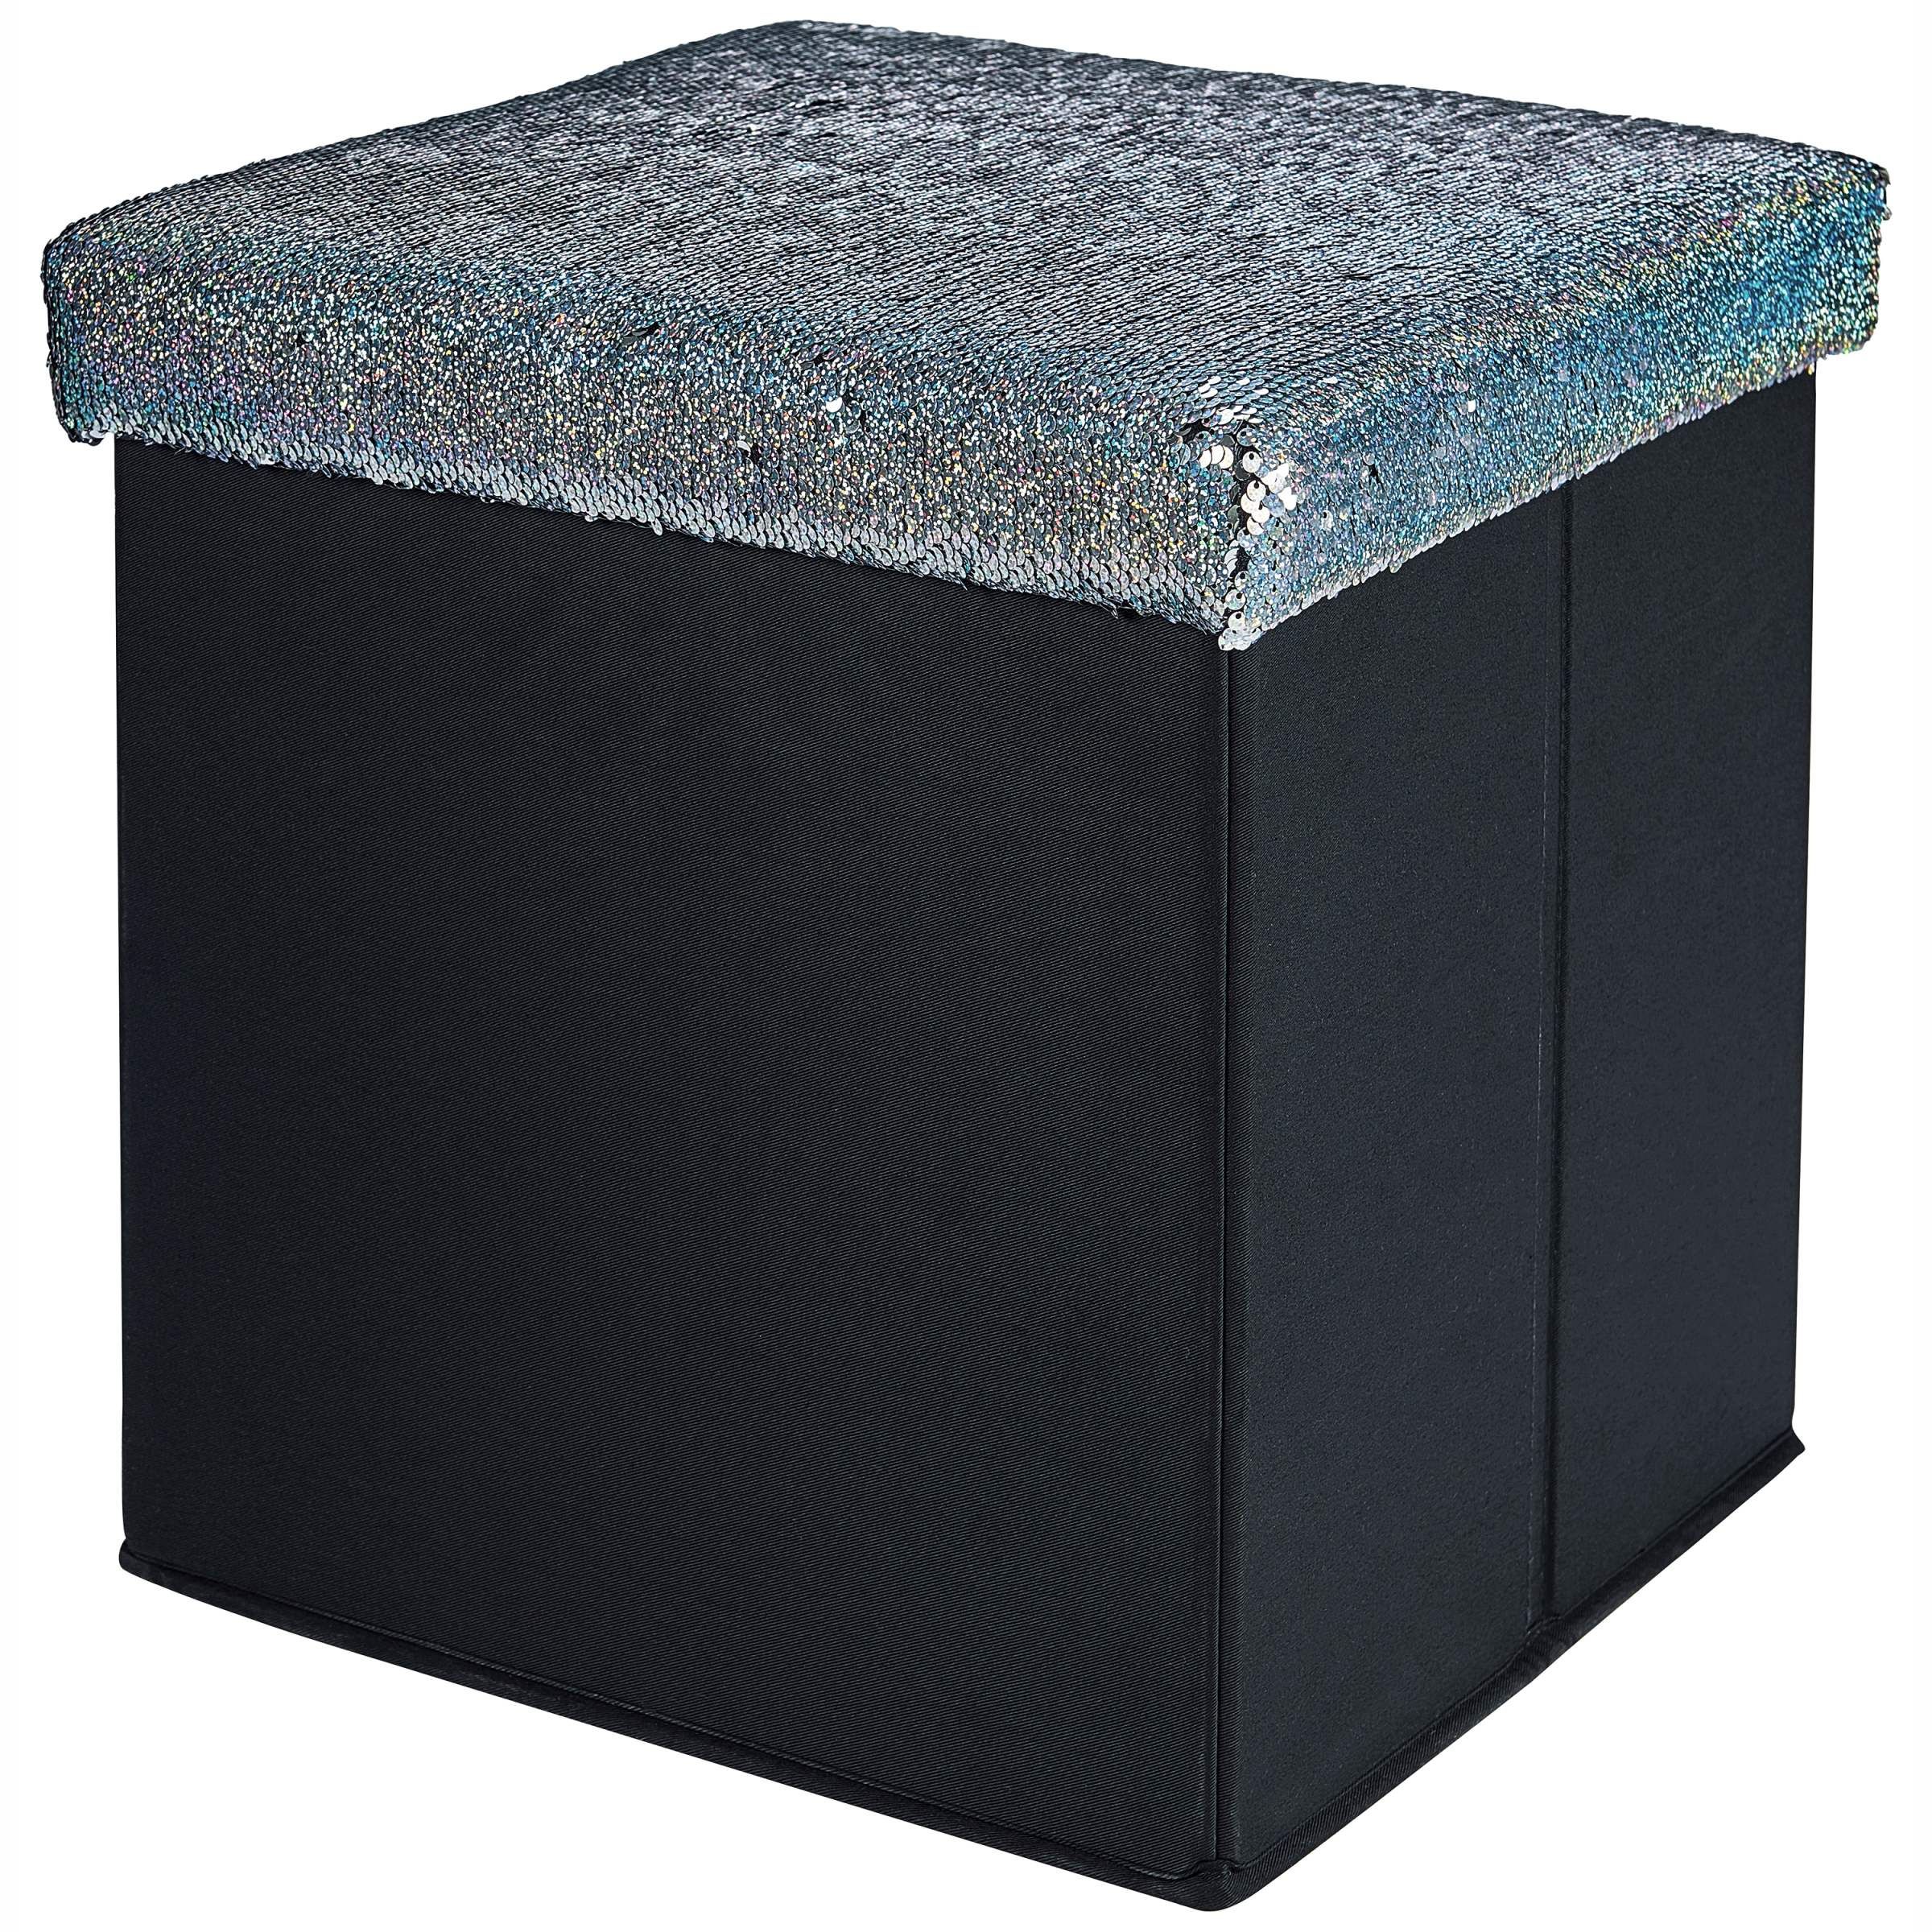 Mainstays Collapsible Storage Ottoman, Aqua Glitter Sequins – Walmart Regarding Ottomans With Sequins (View 2 of 15)